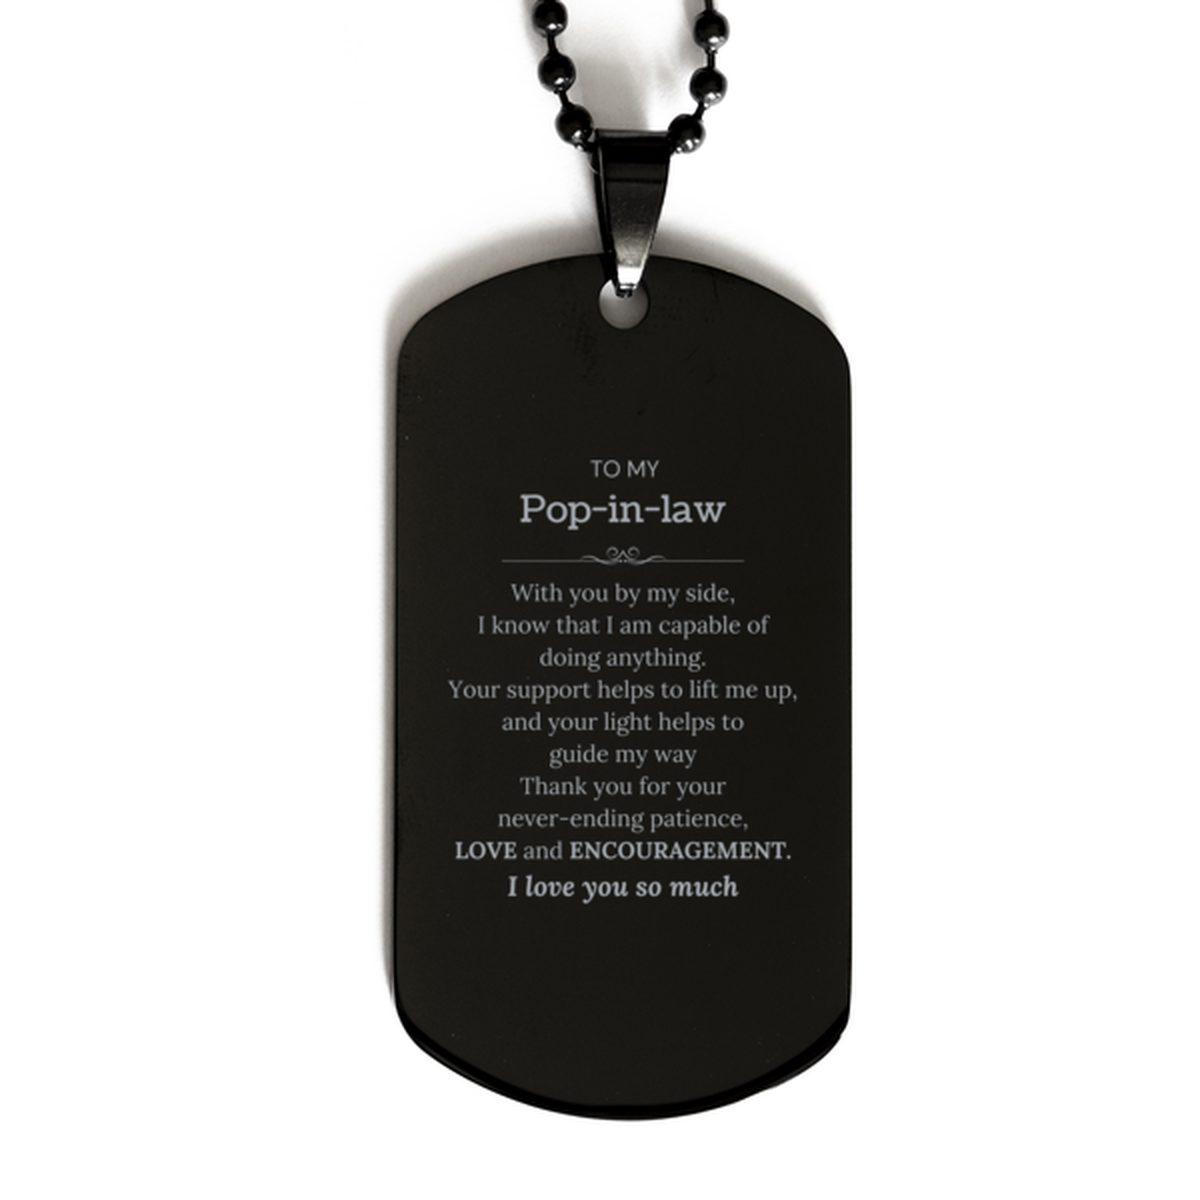 Appreciation Pop-in-law Black Dog Tag Gifts, To My Pop-in-law Birthday Christmas Wedding Keepsake Gifts for Pop-in-law With you by my side, I know that I am capable of doing anything. I love you so much